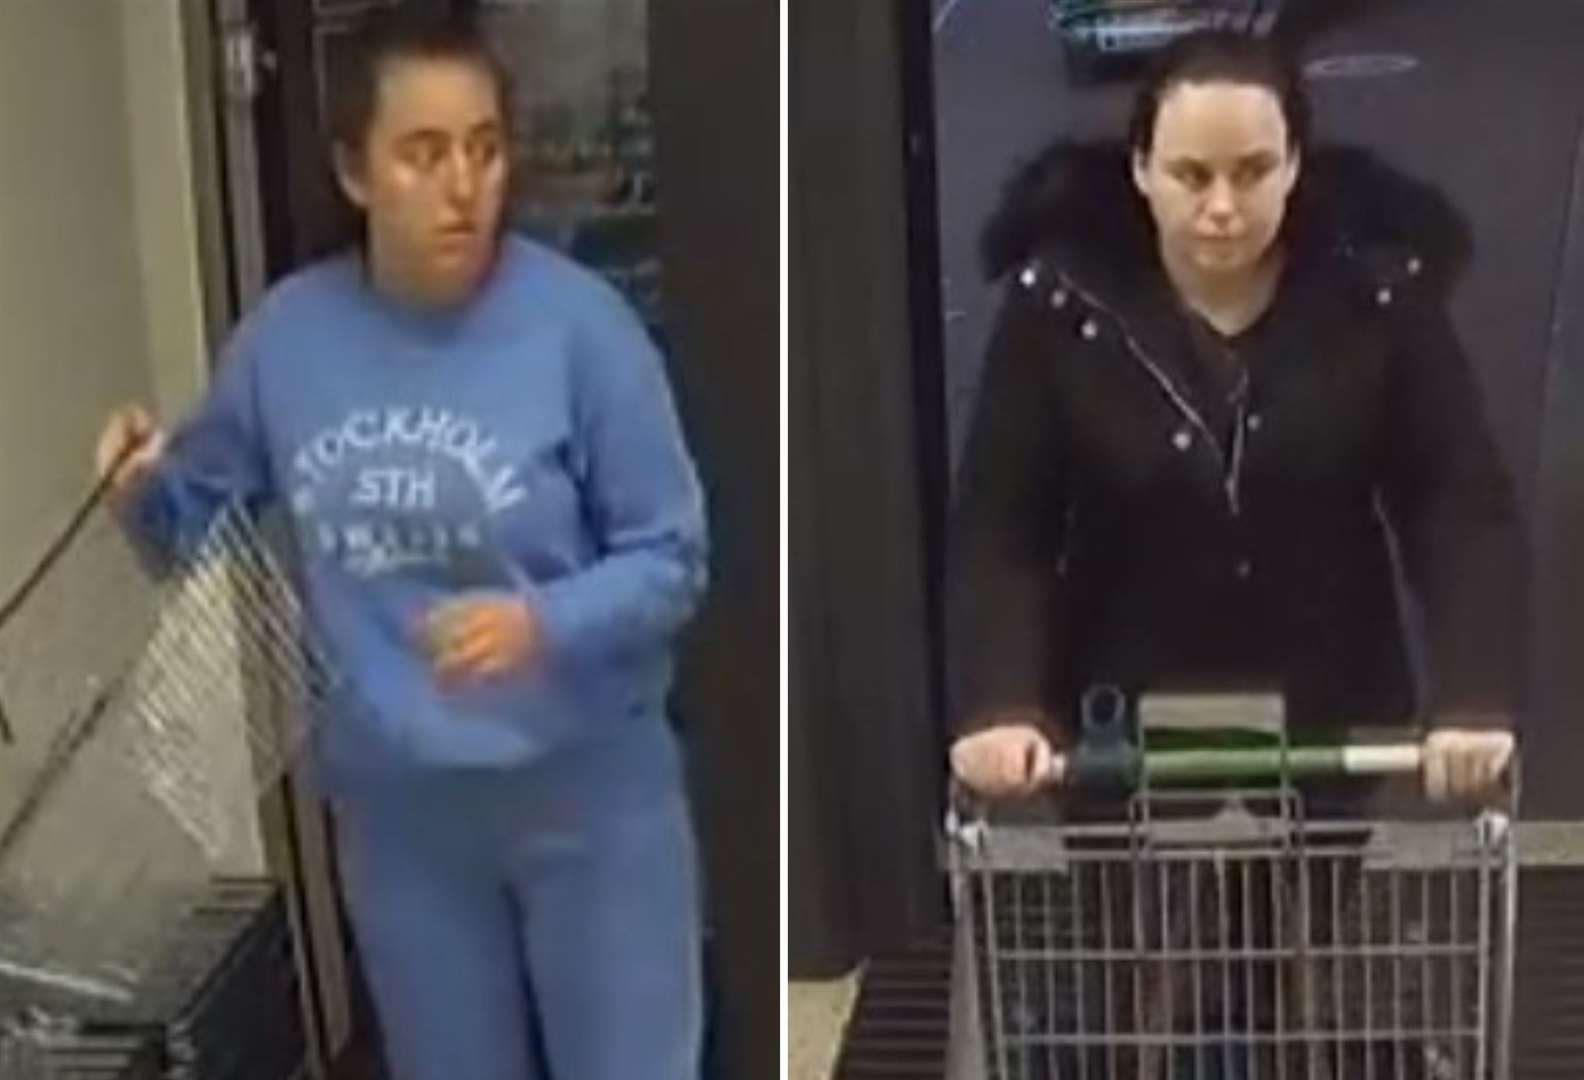 Police would like to speak to two women after £1,900 worth of toothbrushes were stolen from Waitrose in Tenterden